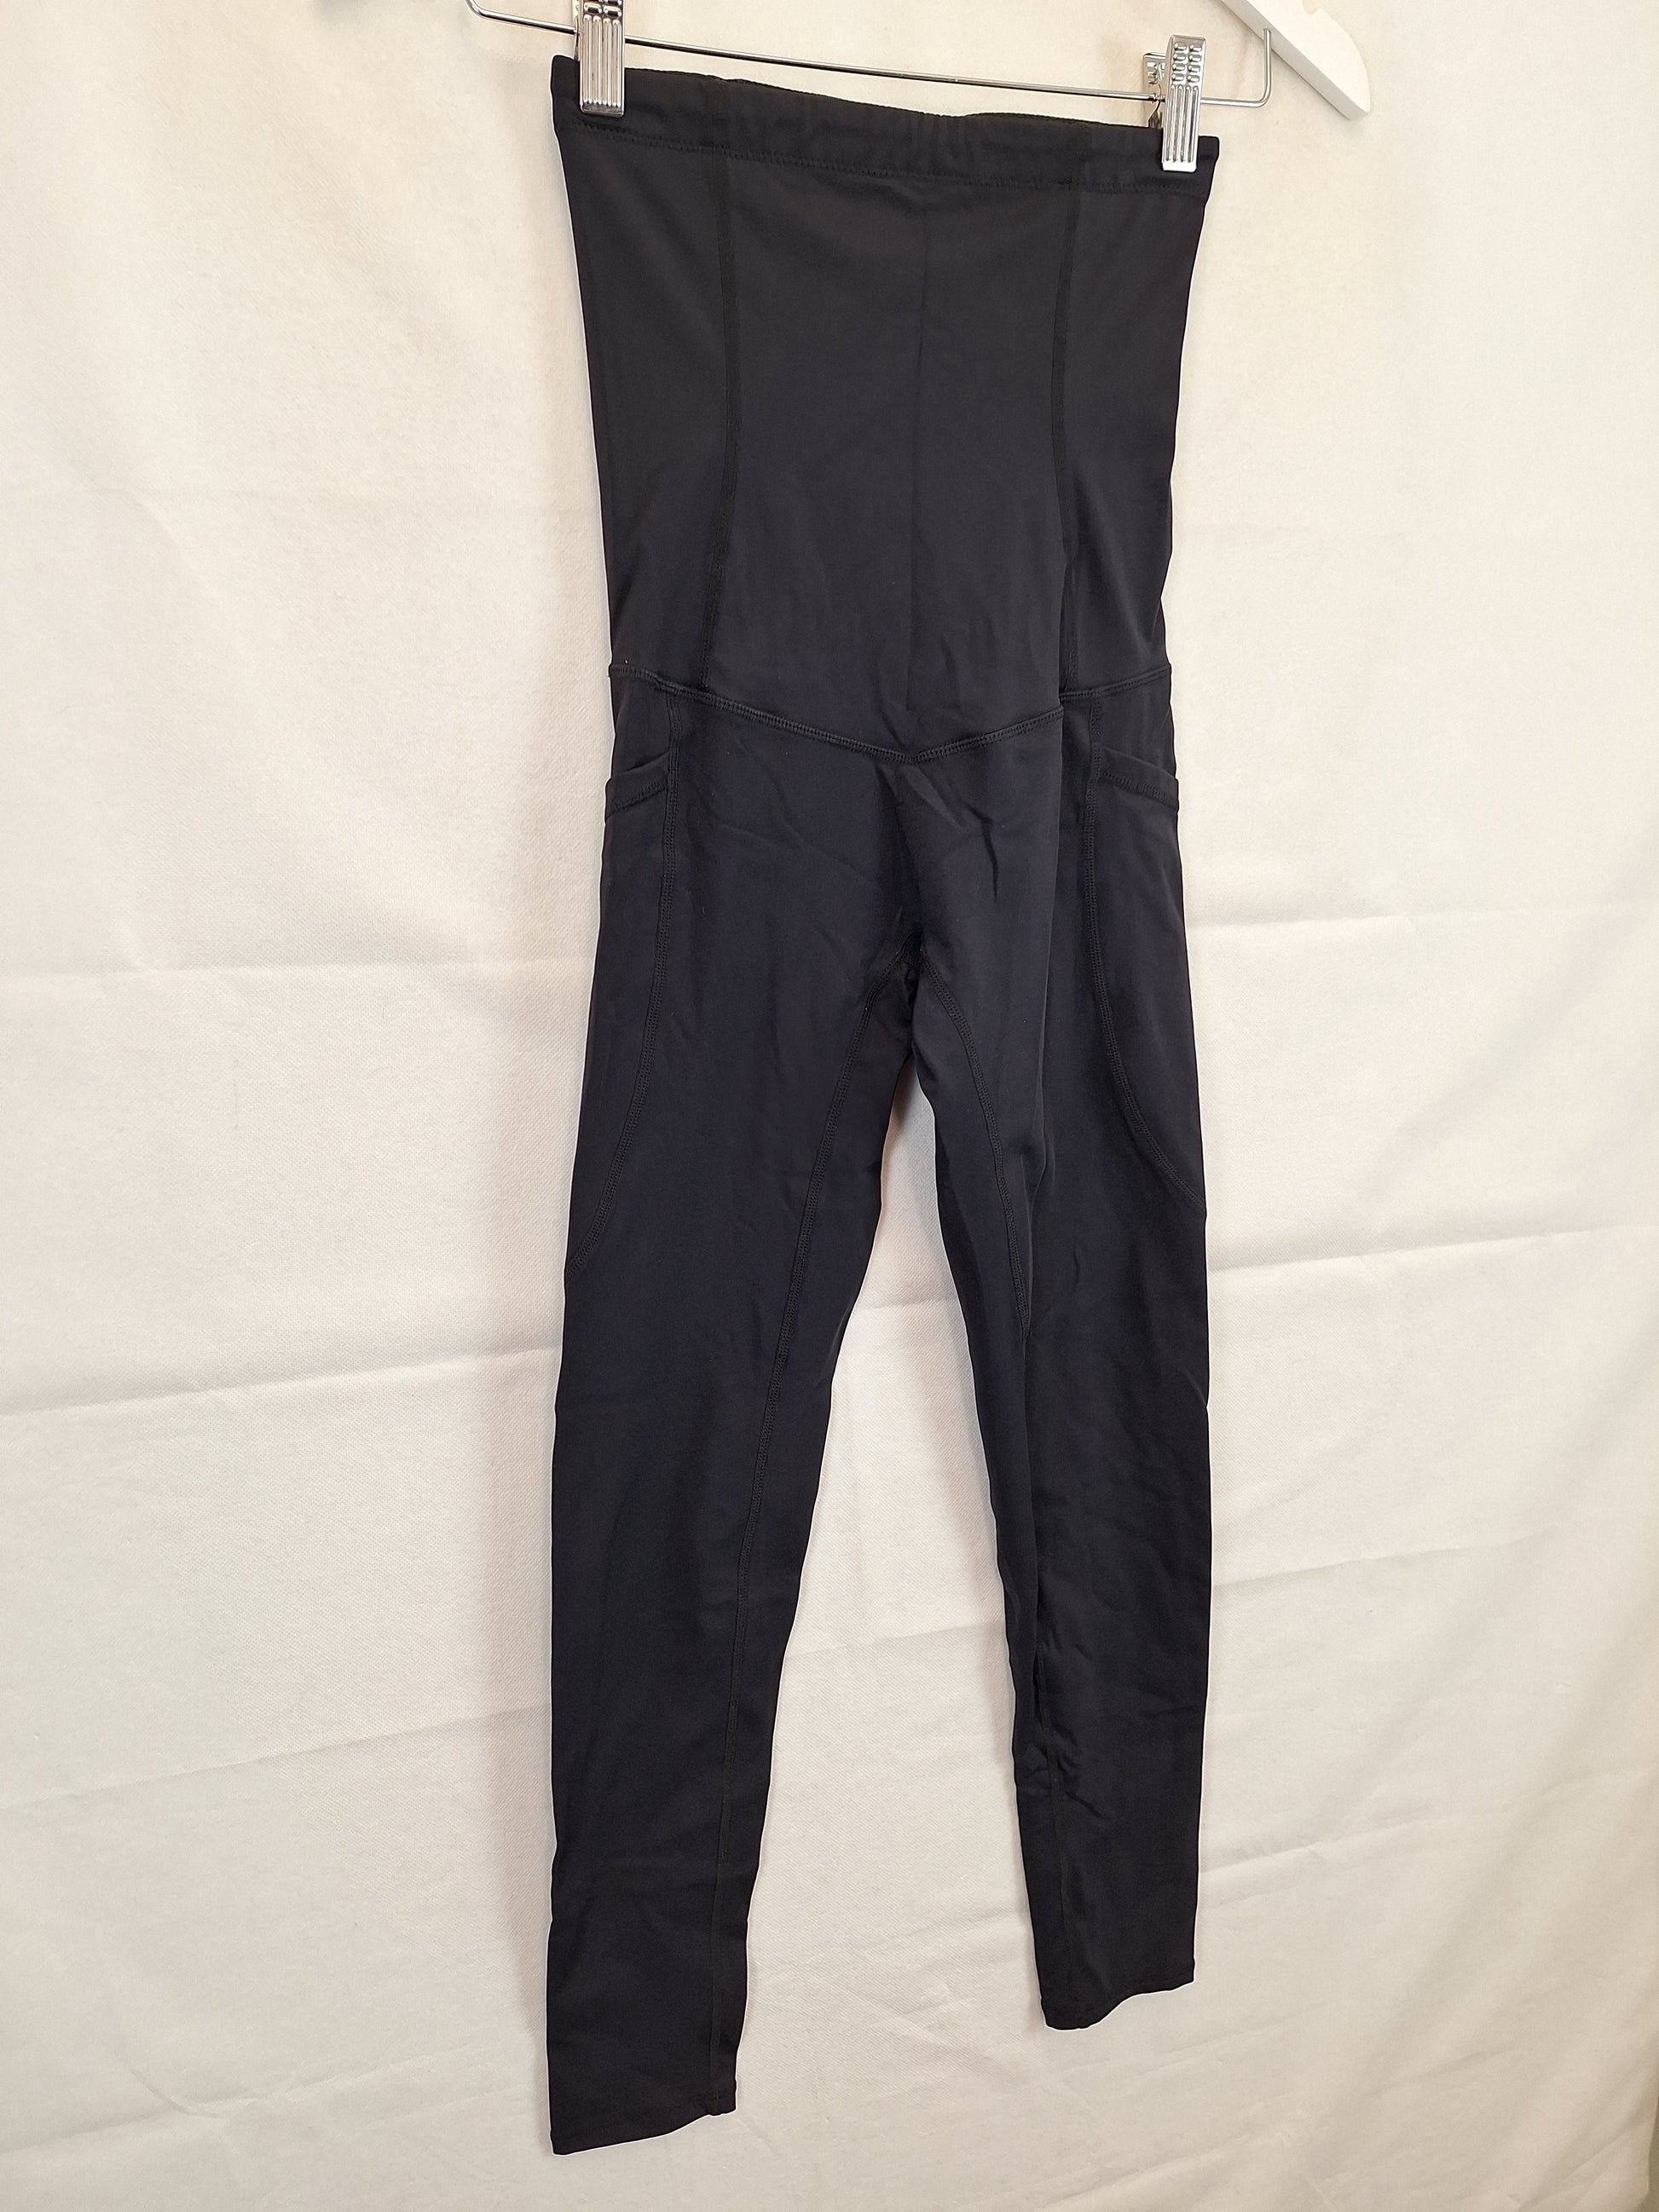 Emamaco Maternity Stretch Pocket Leggings Size S by SwapUp-Online Second Hand Store-Online Thrift Store